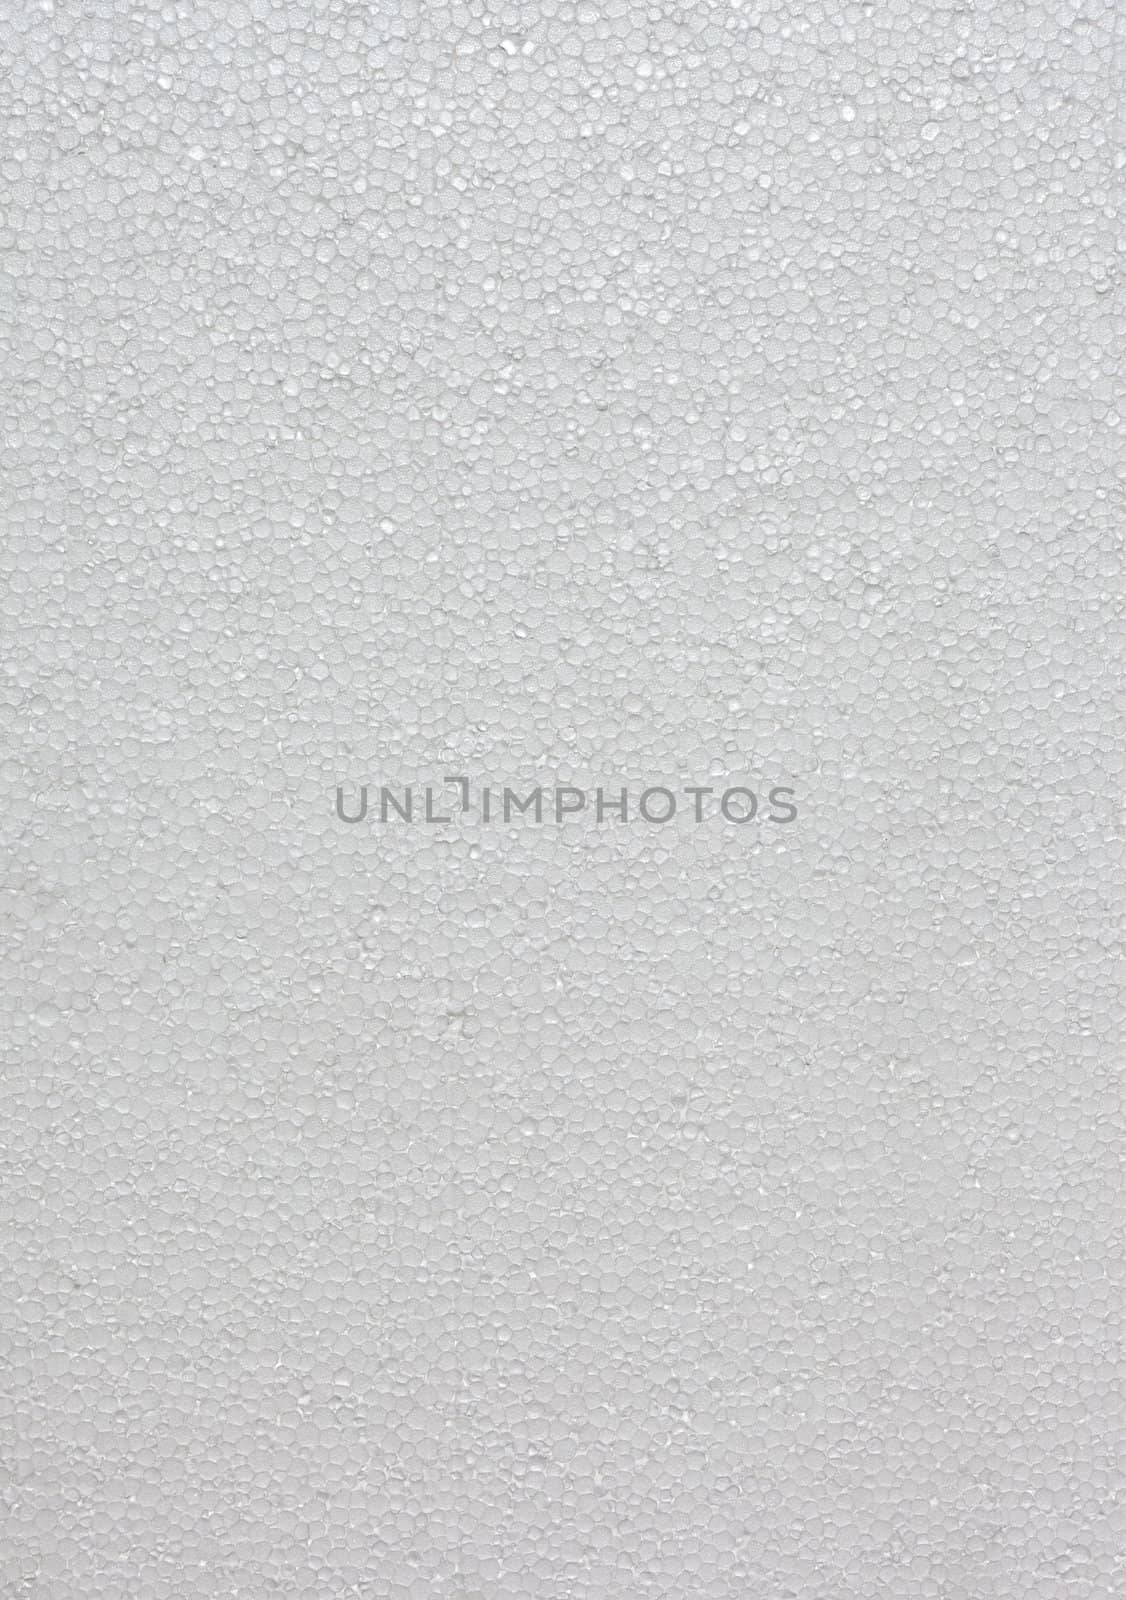 the beautiful white leather background for design